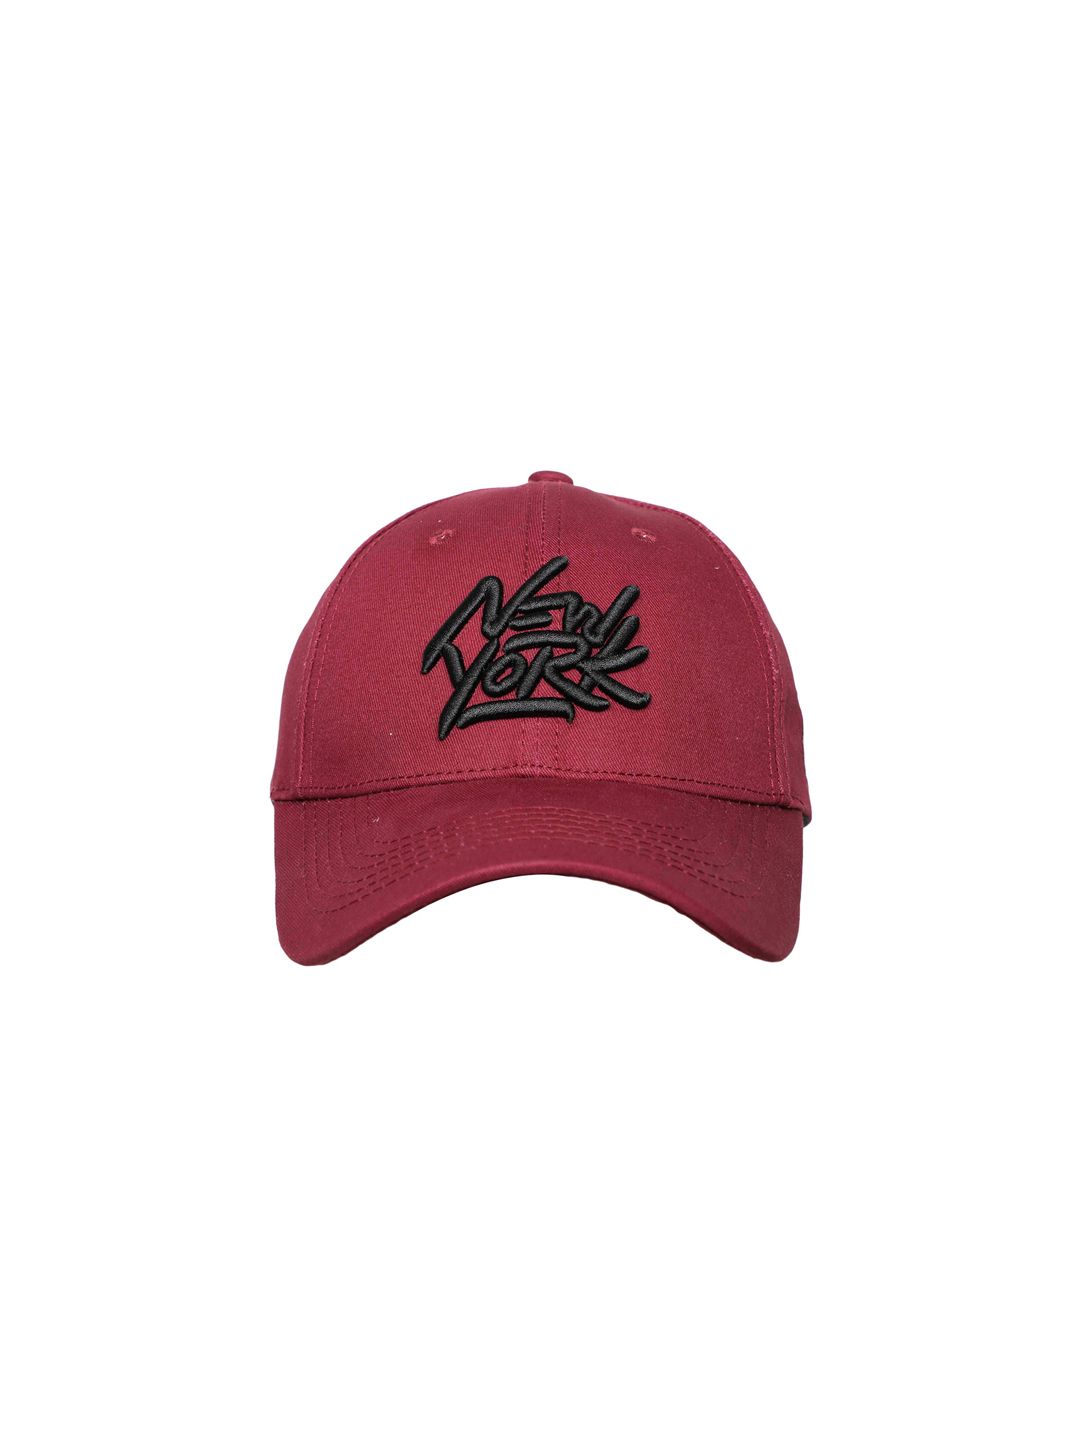 FabSeasons Unisex Maroon Embroidered Baseball Cap Price in India